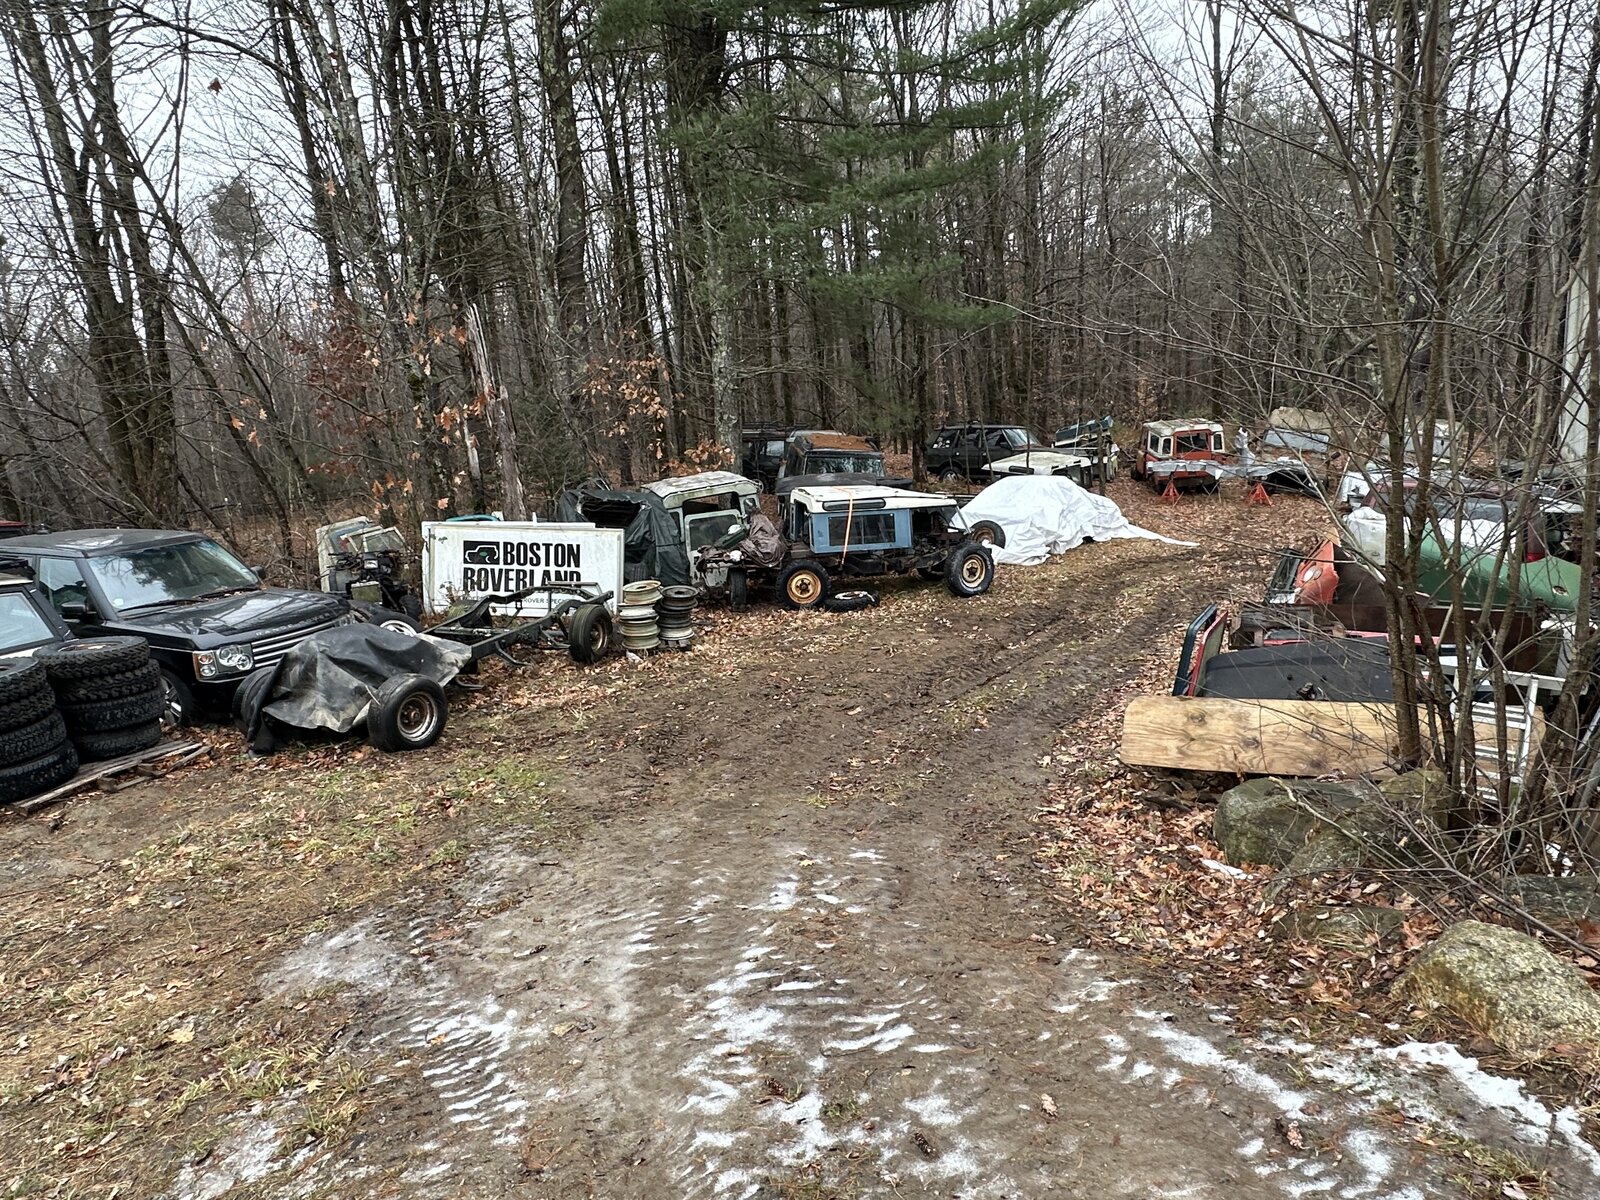 Where old Land Rovers go to die. And some are reborn.